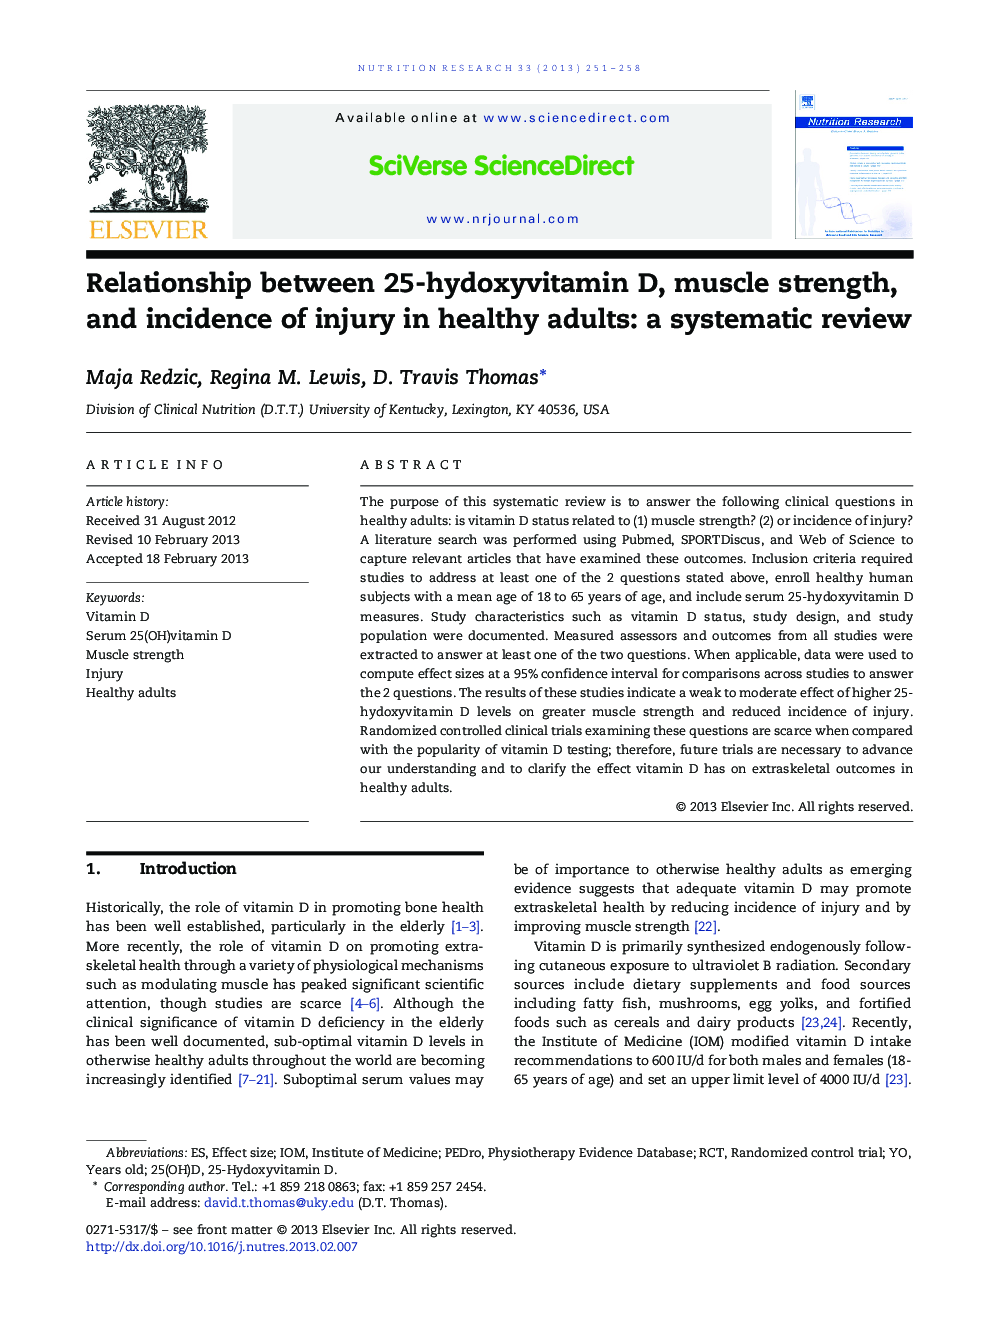 Relationship between 25-hydoxyvitamin D, muscle strength, and incidence of injury in healthy adults: a systematic review